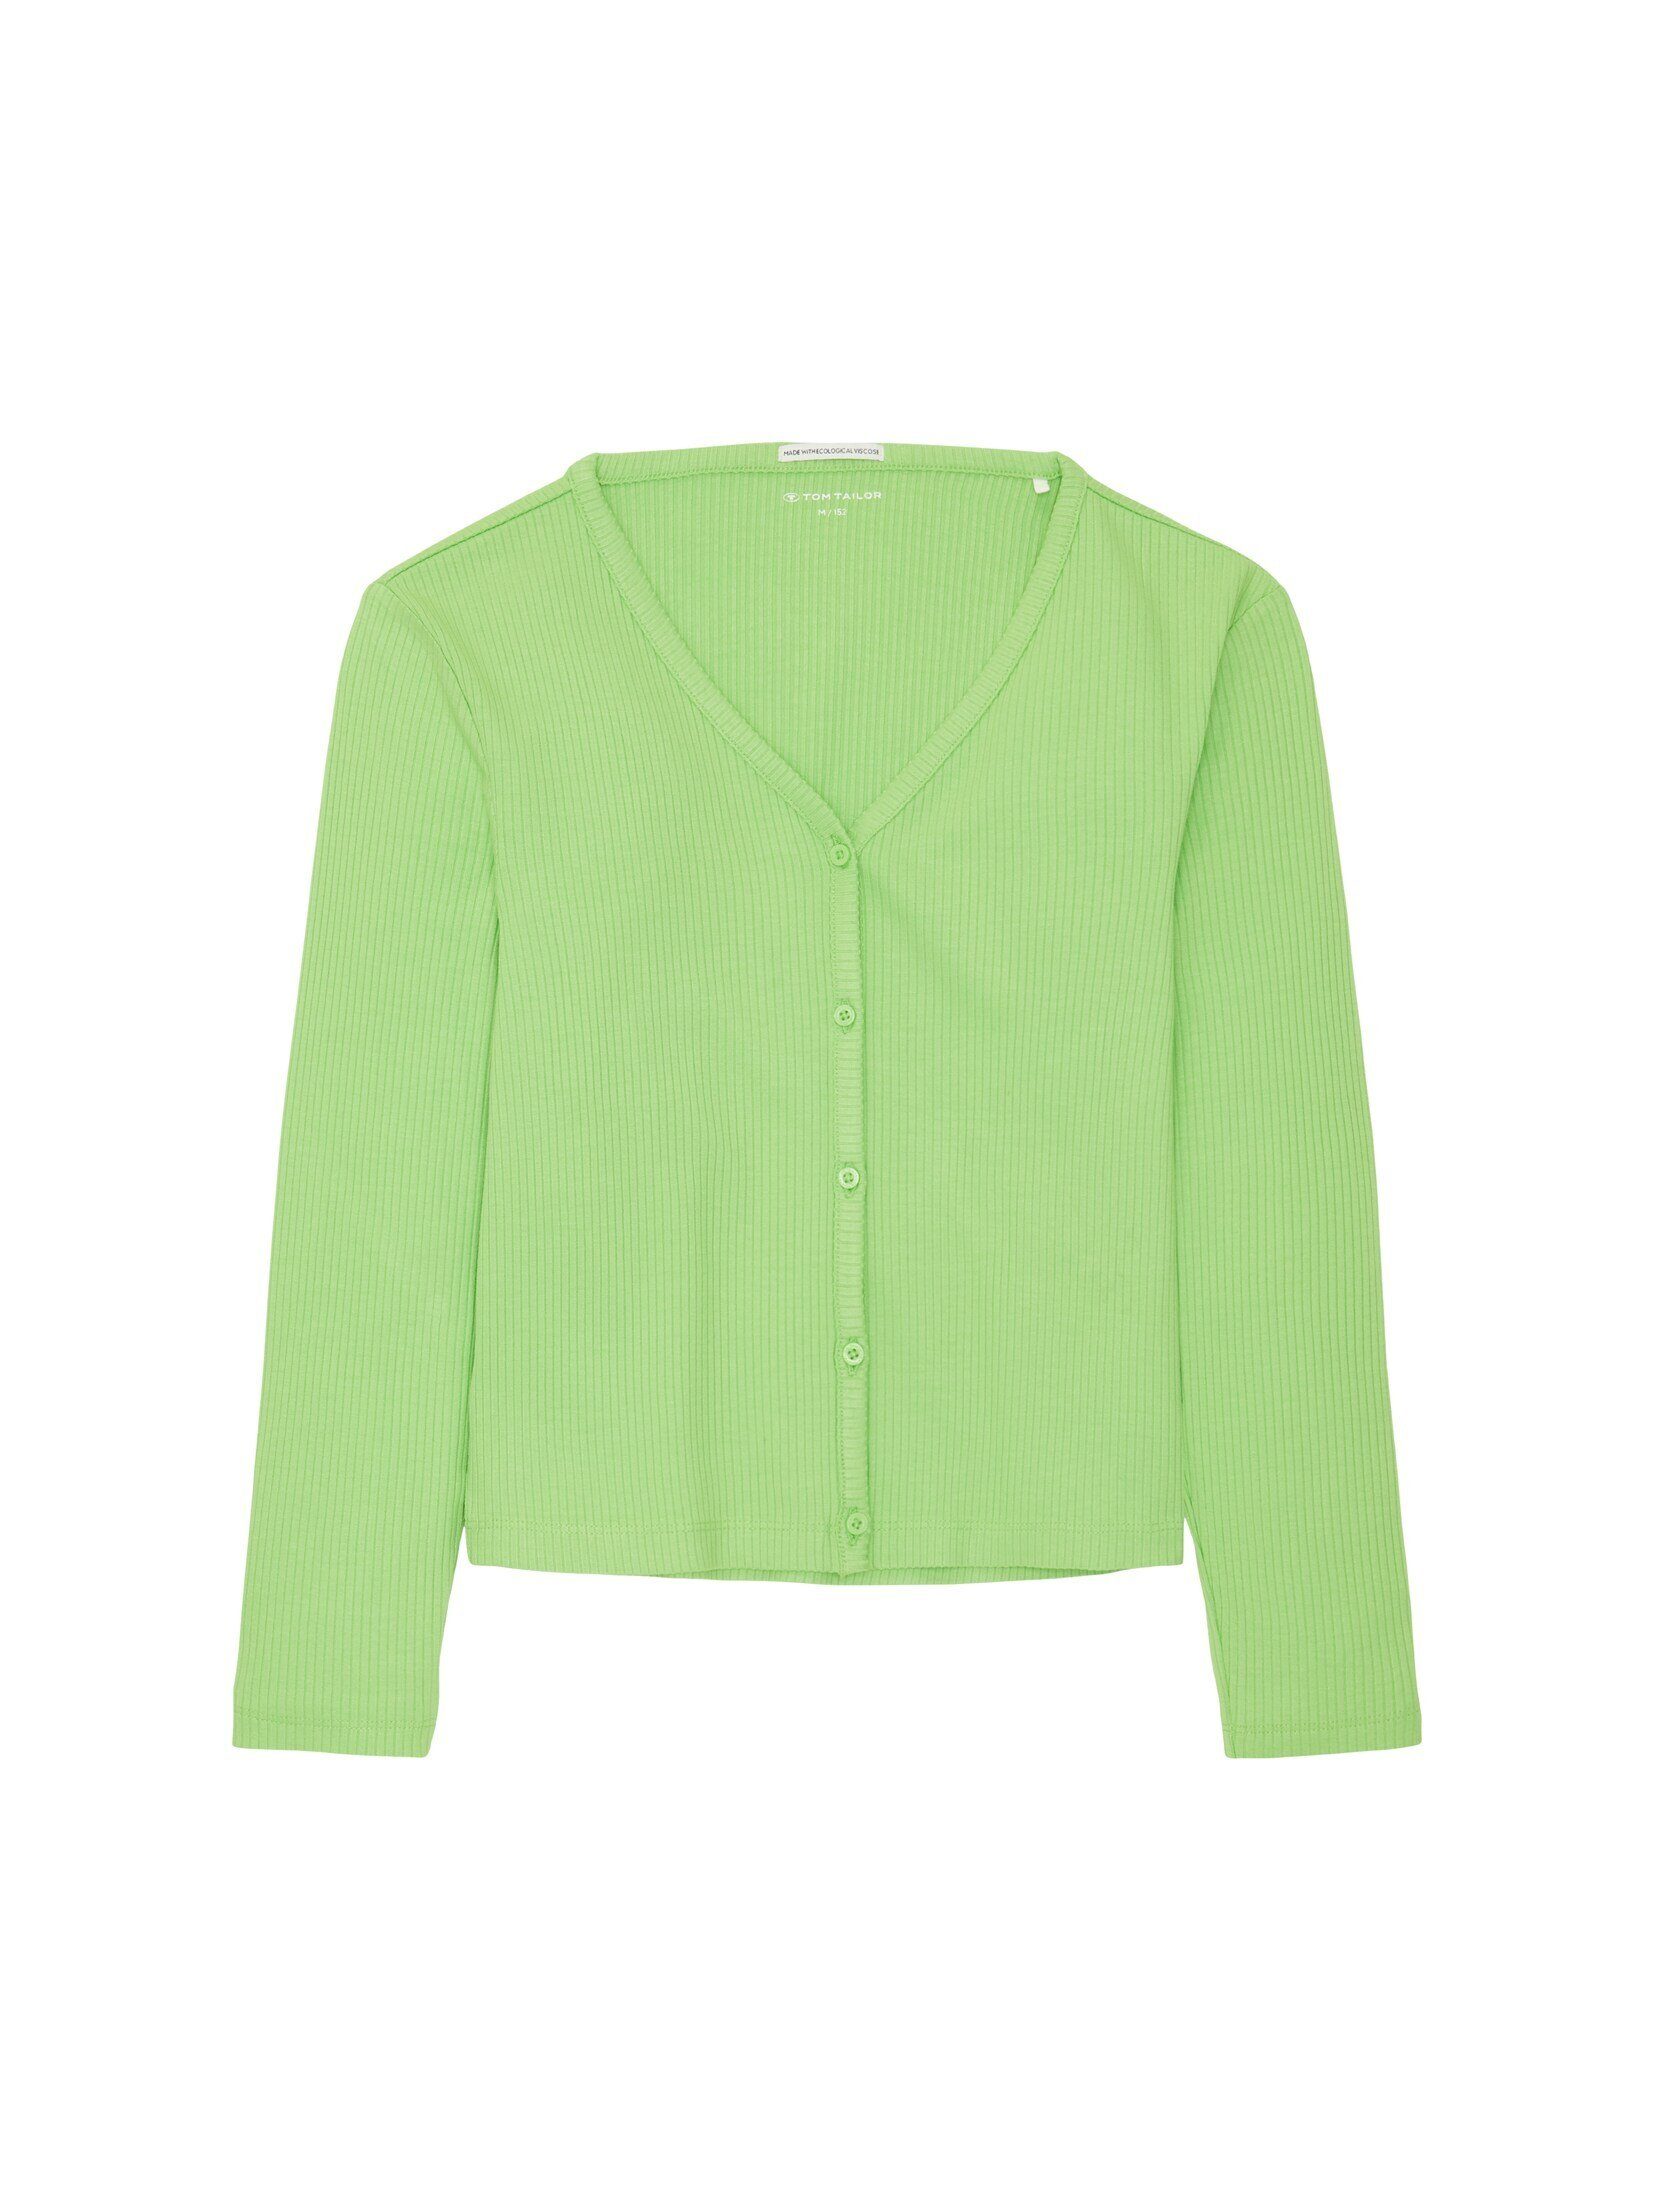 green Cropped liquid T-Shirt TOM TAILOR lime Rippjacke